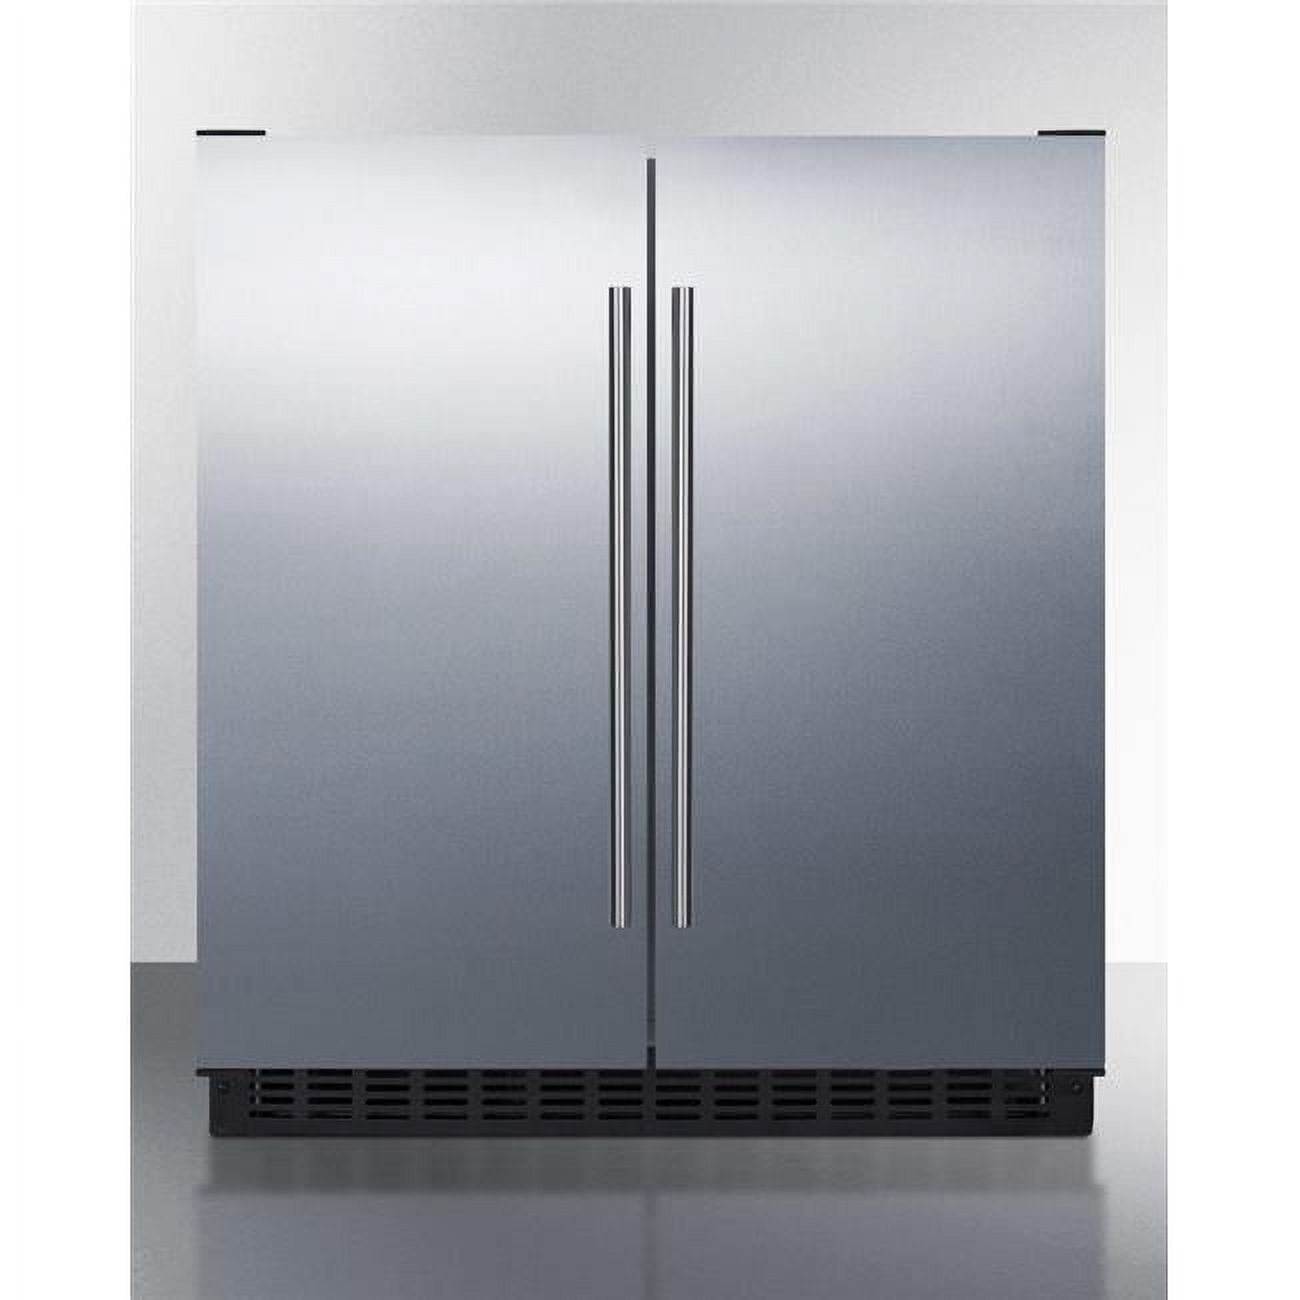 30 in. Wide Built-in Undercounter Side-by-Side French Door Refrigerator-Freezer, Stainless Steel - White - image 1 of 1